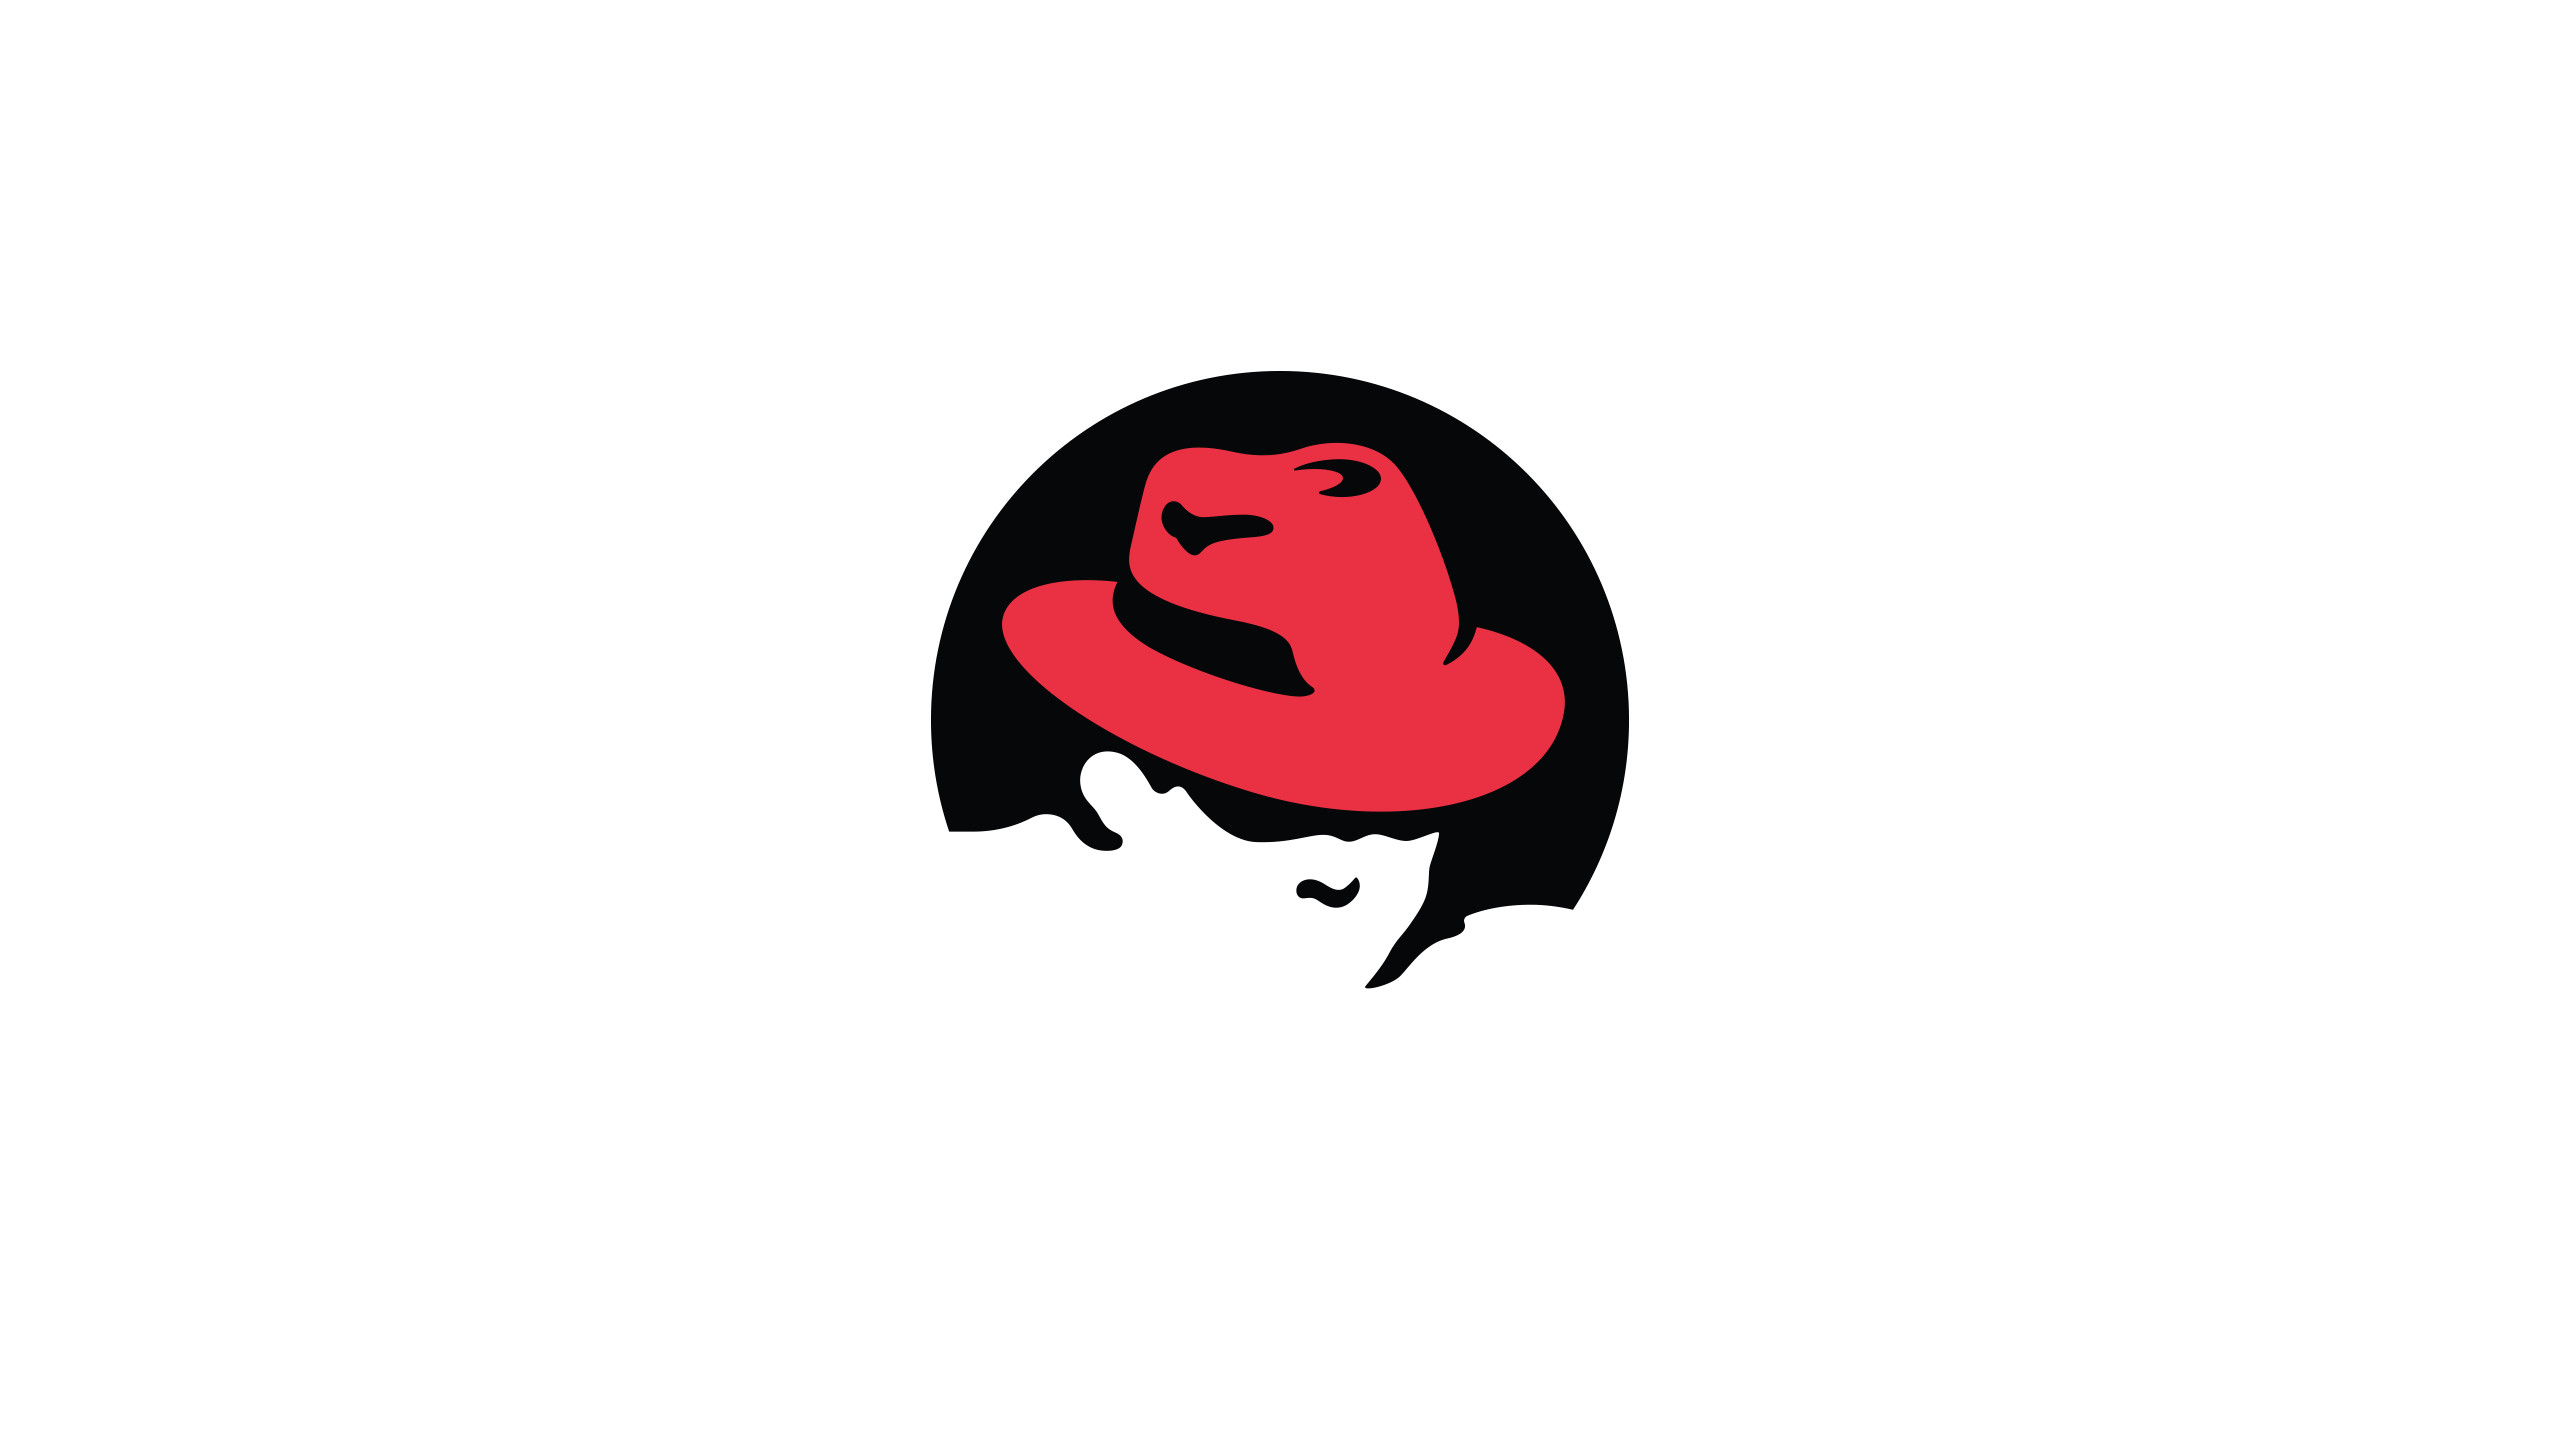 Red Hat Wallpapers